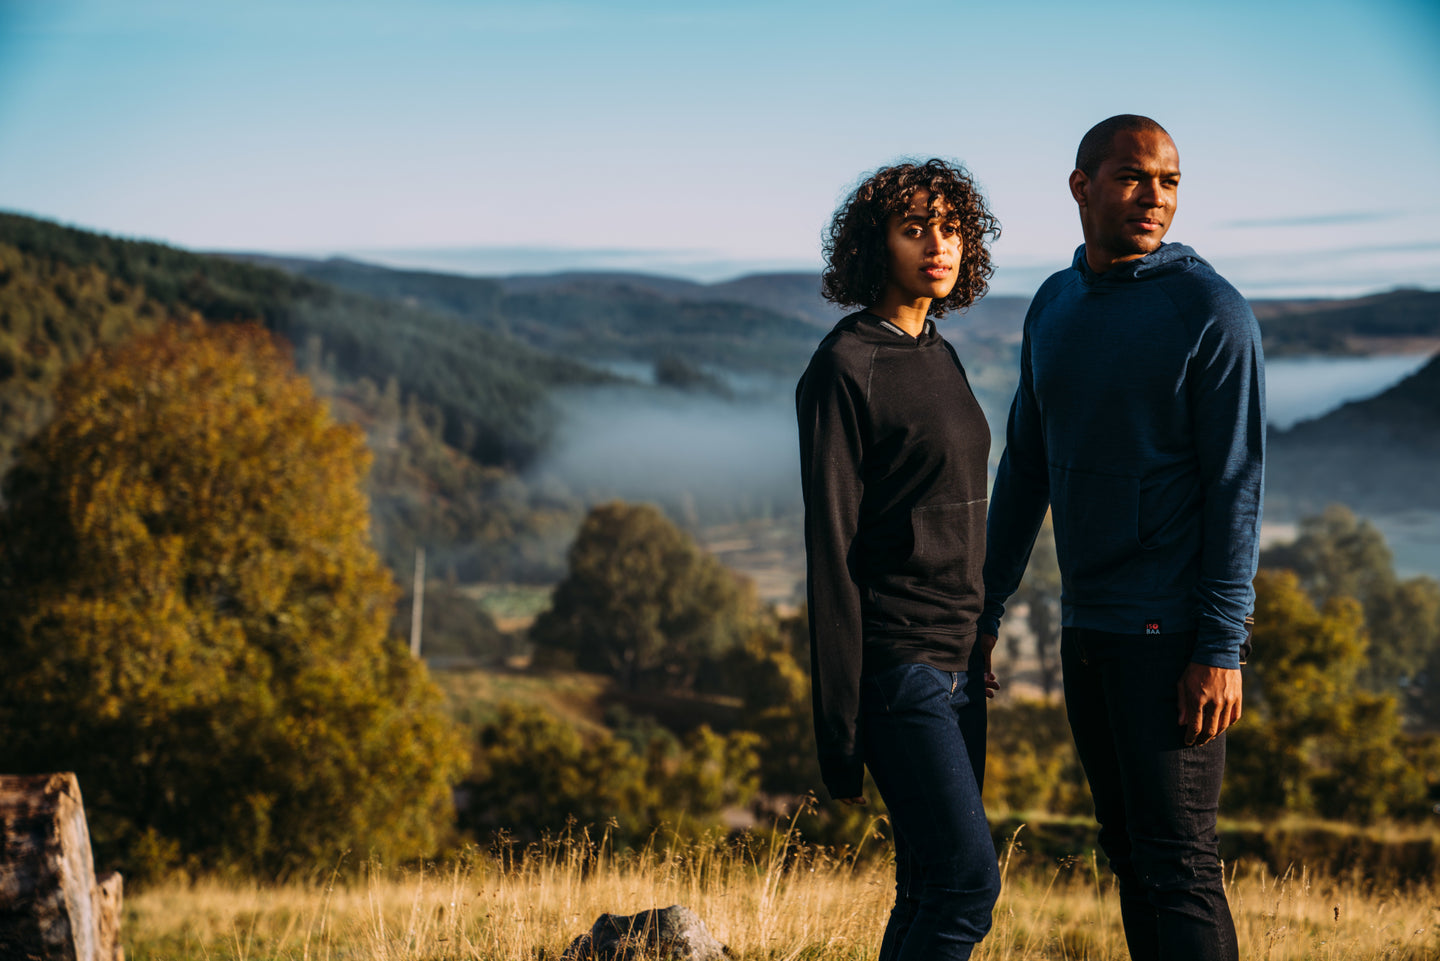 Man and woman standing in a scenic countryside, dressed in Isobaa merino hoodies